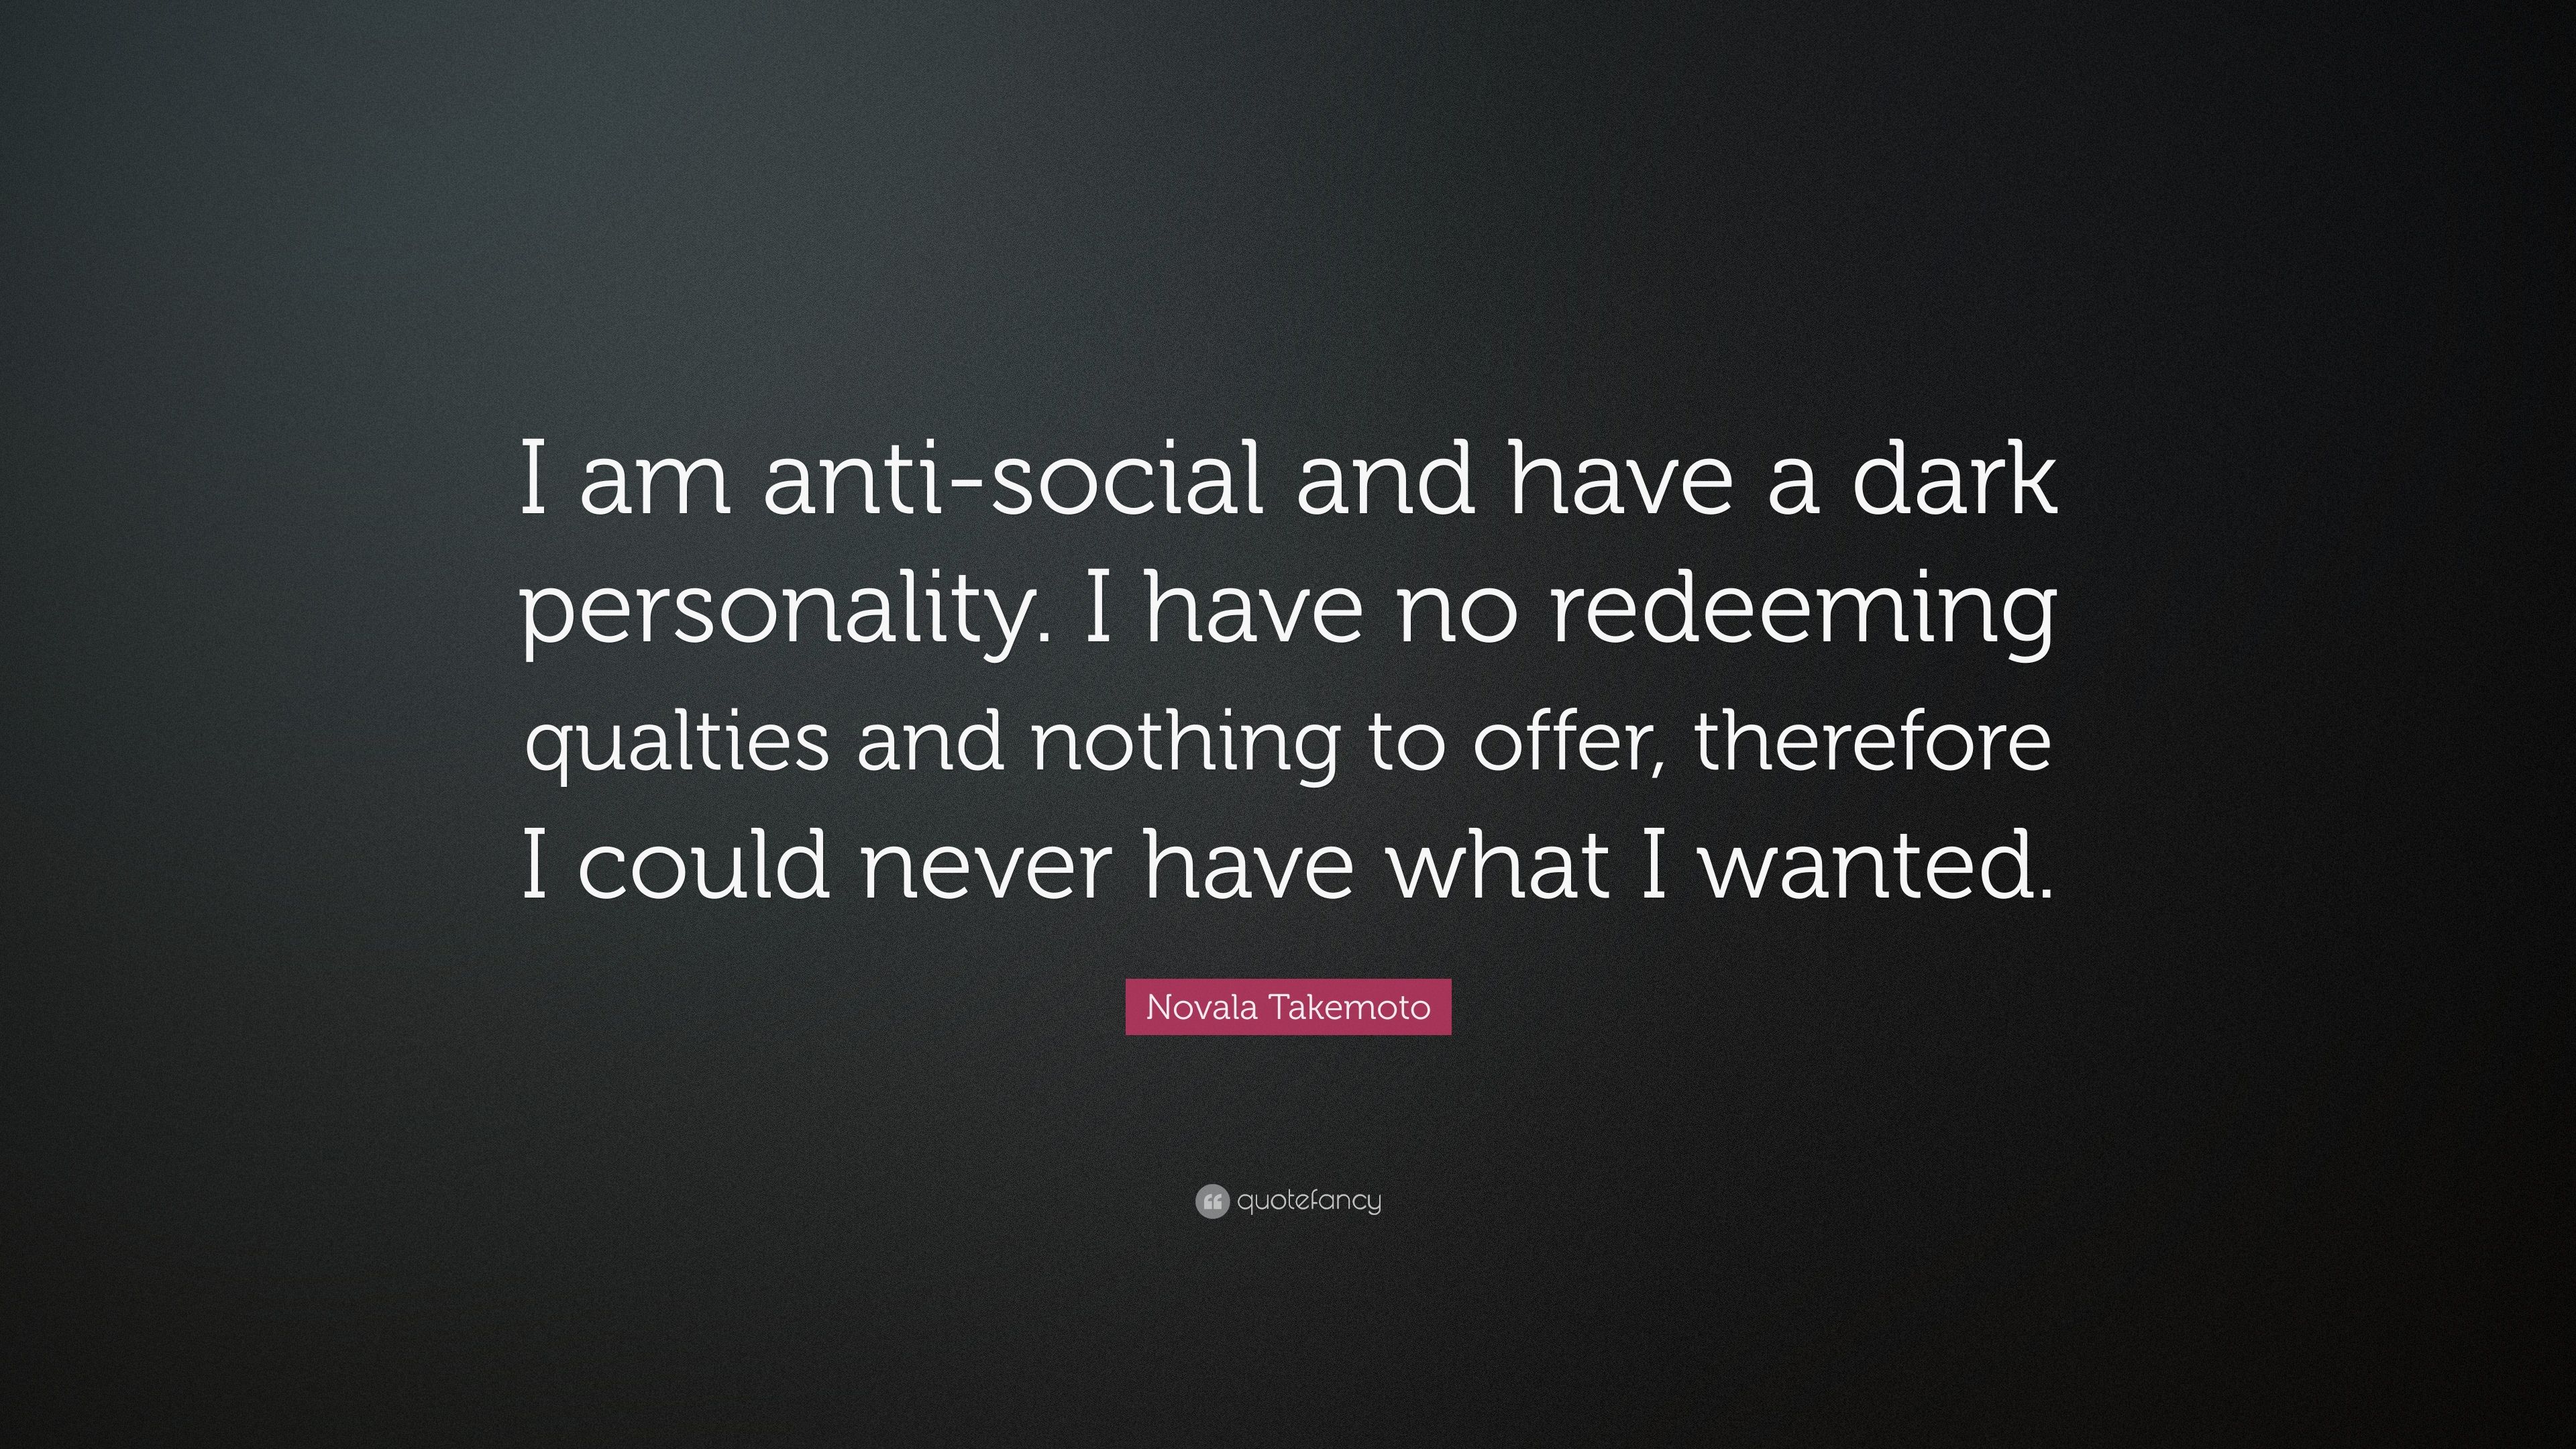 Novala Takemoto Quote: “I Am Anti Social And Have A Dark Personality